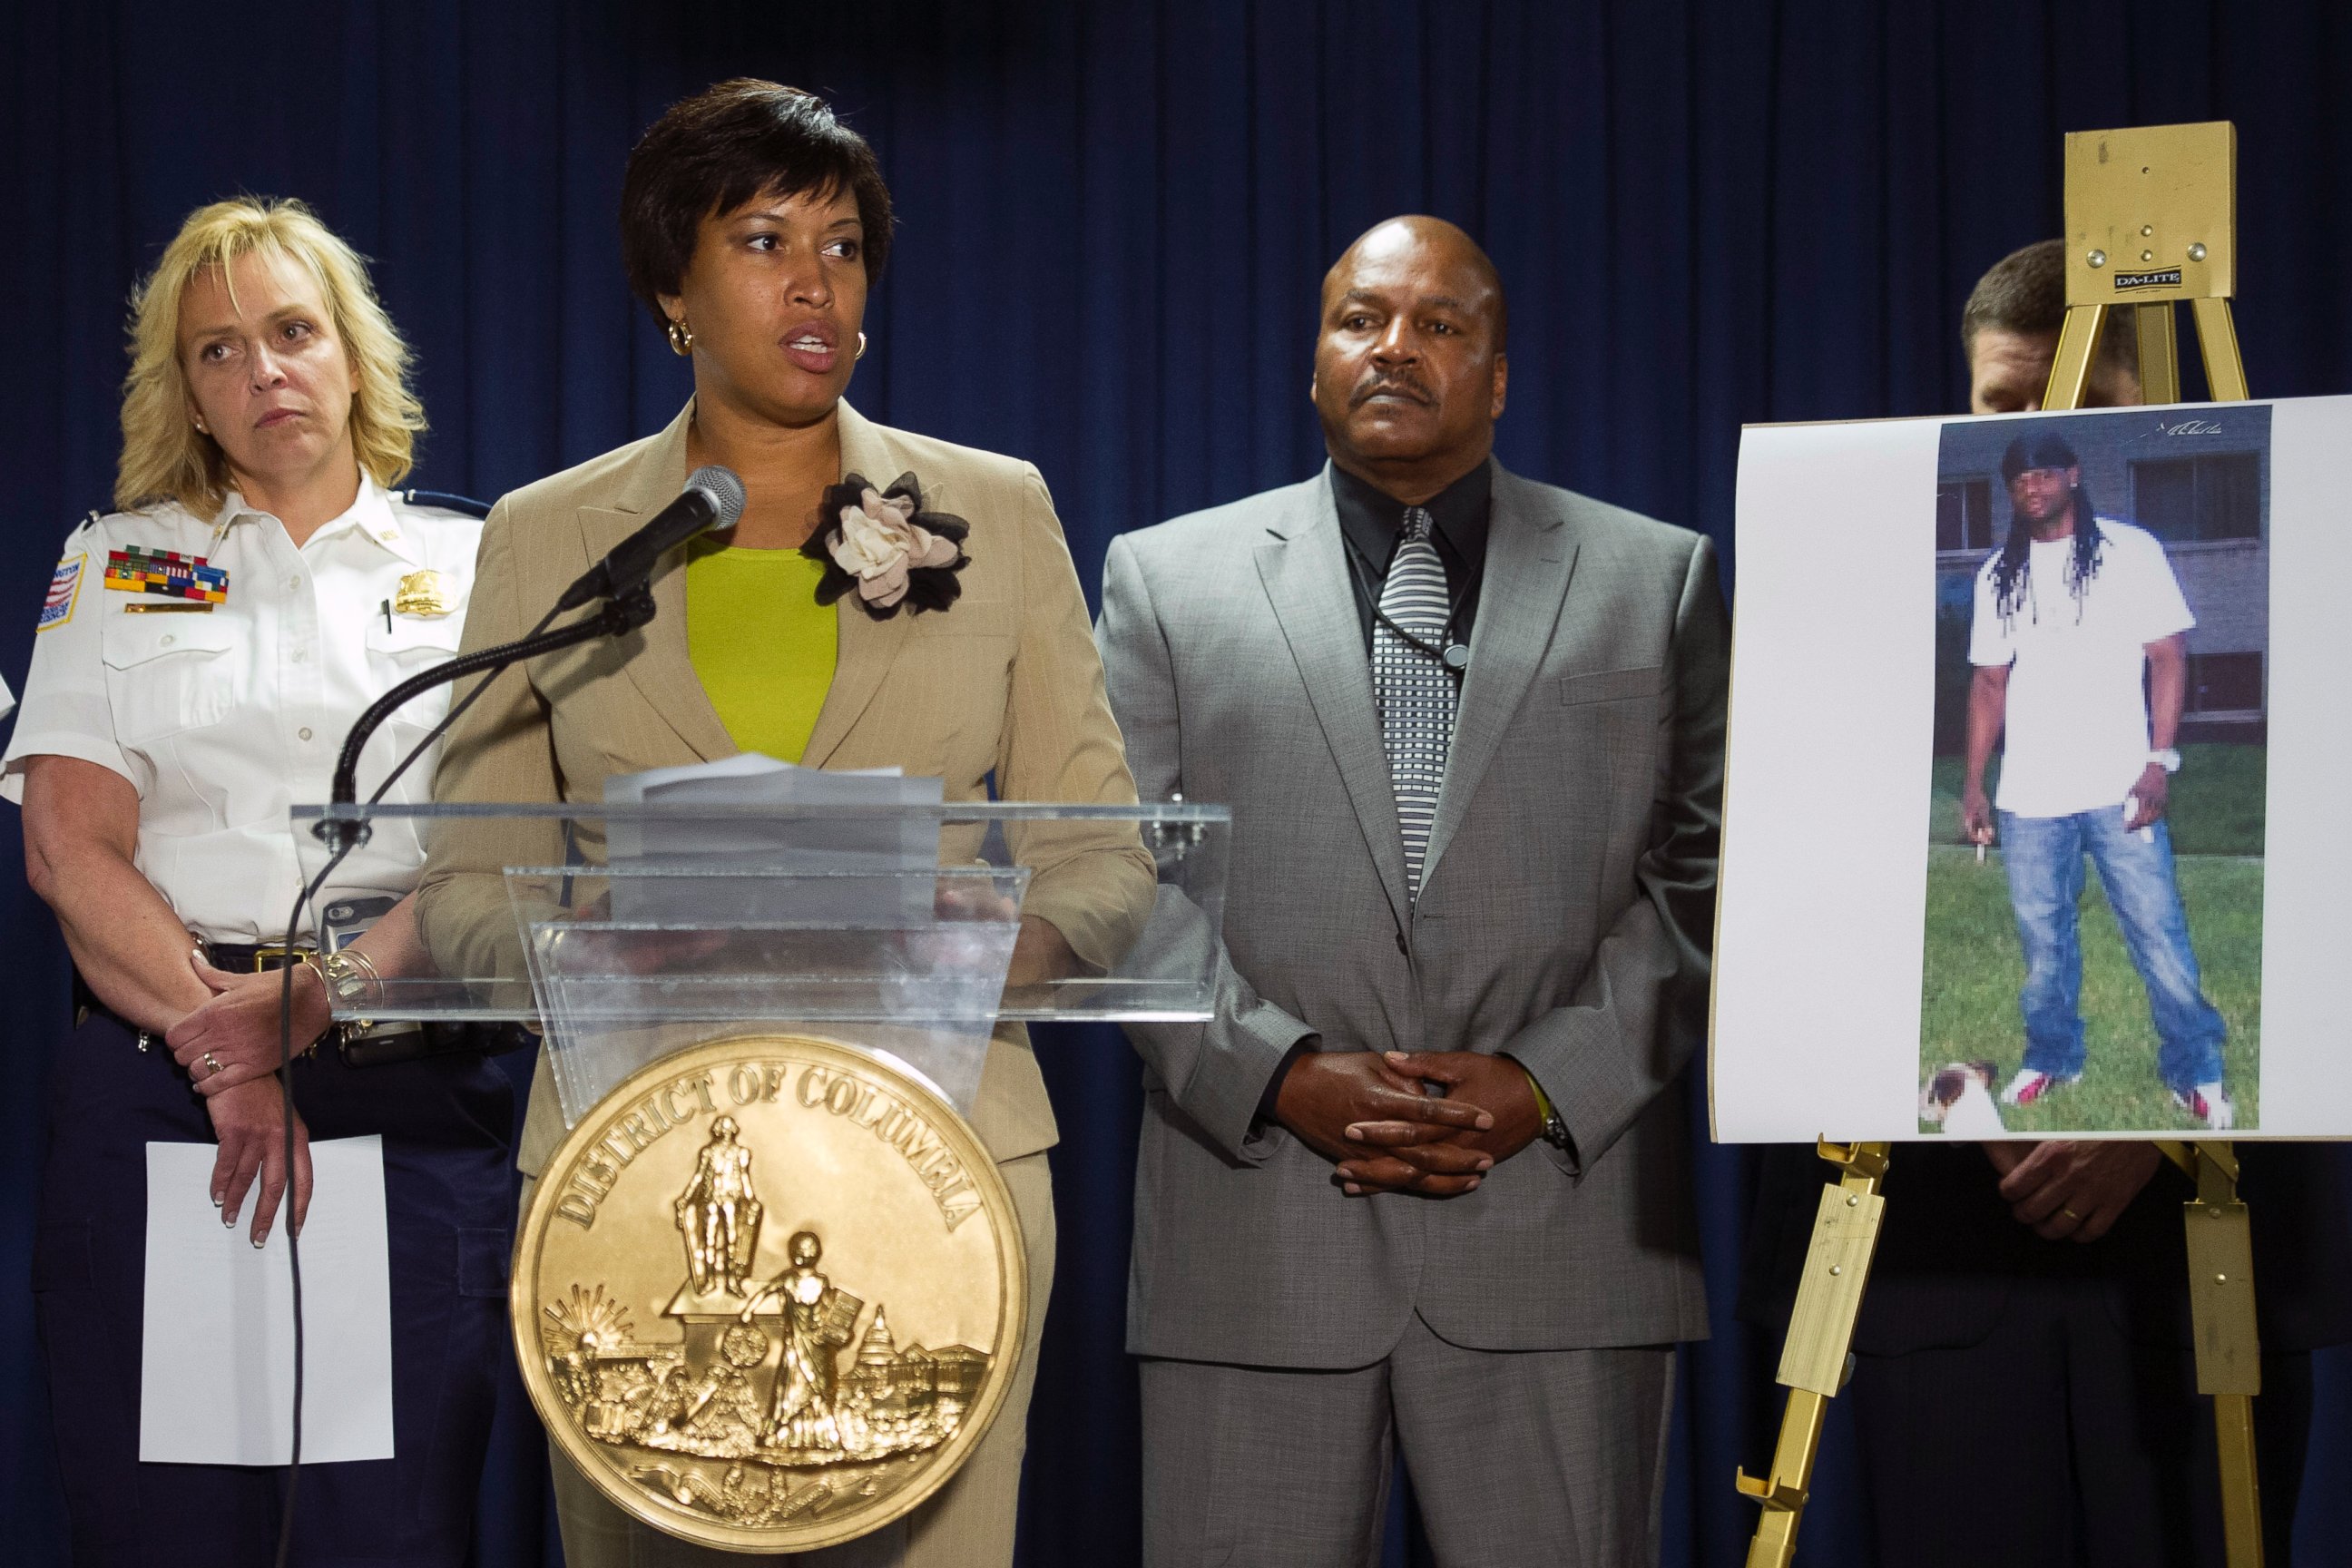 PHOTO: Washington Mayor Muriel Bowser, center, flanked by Police Chief Cathy Lanier, left, and Special Agent in Charge Charlie Smith, Bureau of Alcohol, Tobacco, Firearms and Explosives, speaks during a news conference in Washington, May 21, 2015.